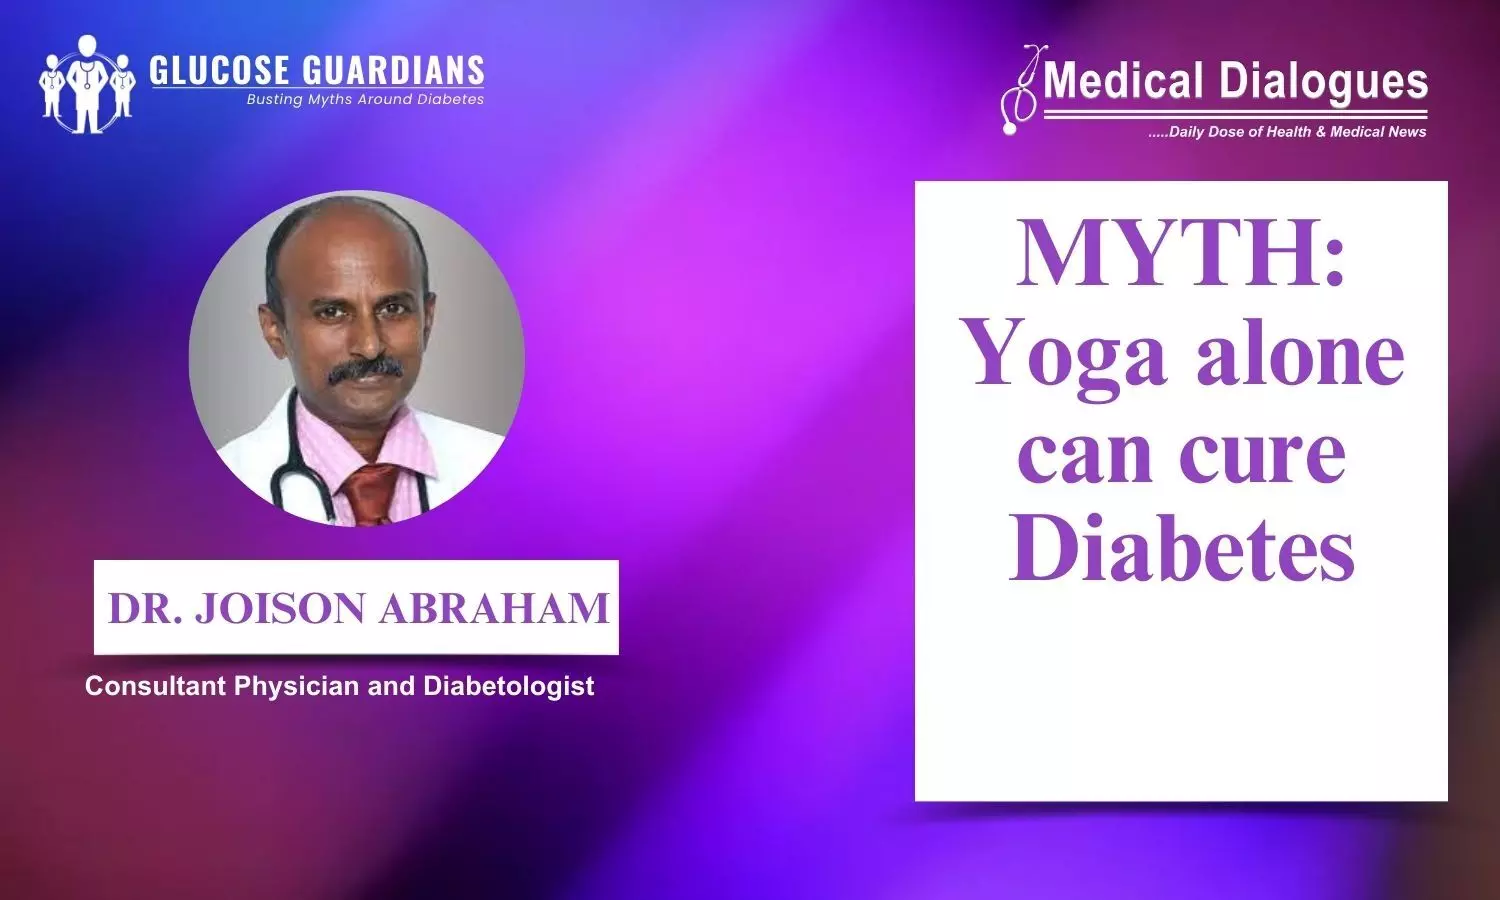 Yoga practices for diabetes reversal: Fact or fiction? - Dr Joison Abraham